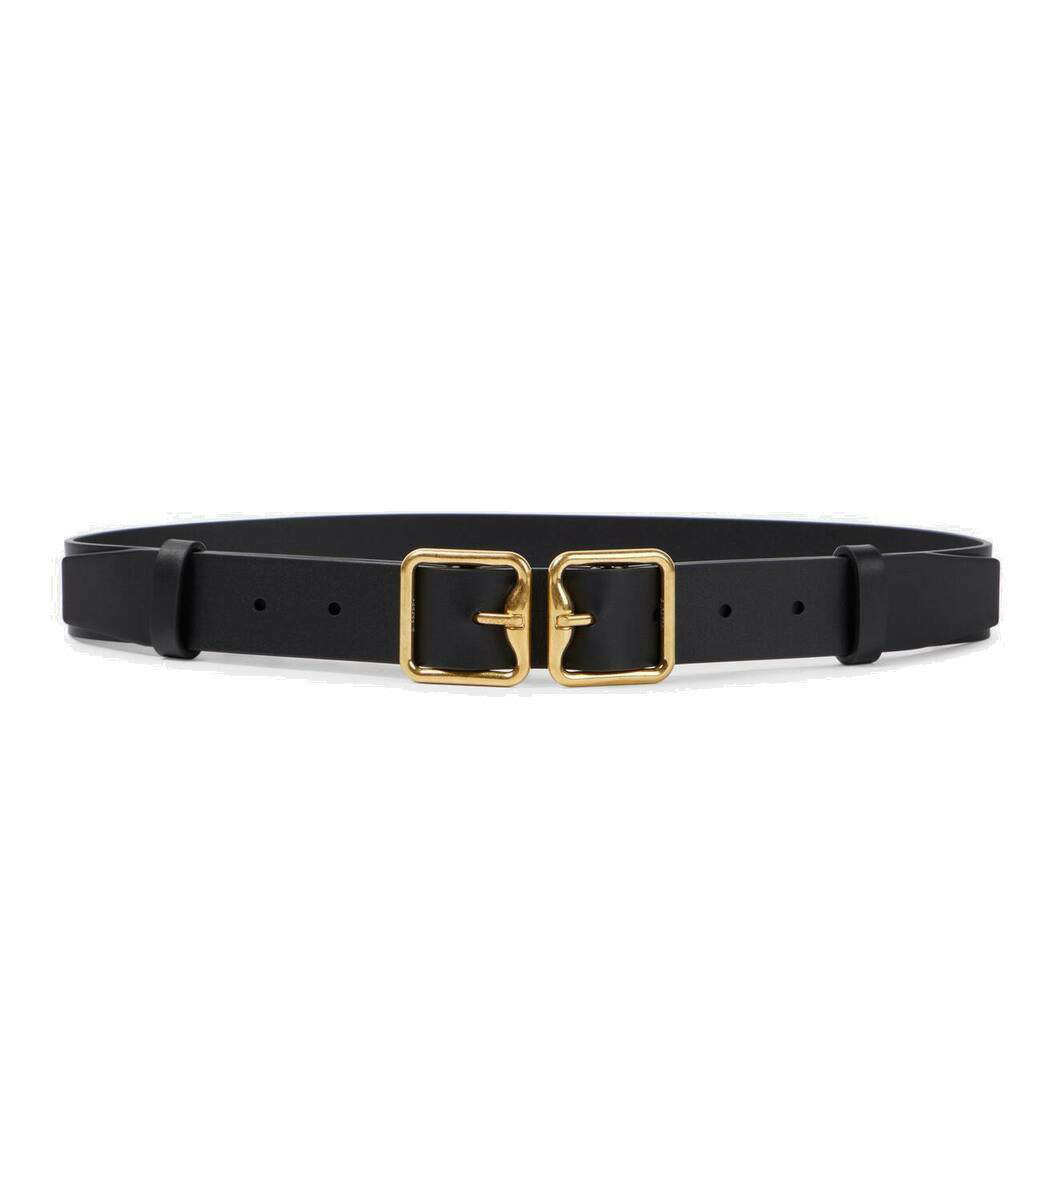 Burberry Double B leather belt Burberry